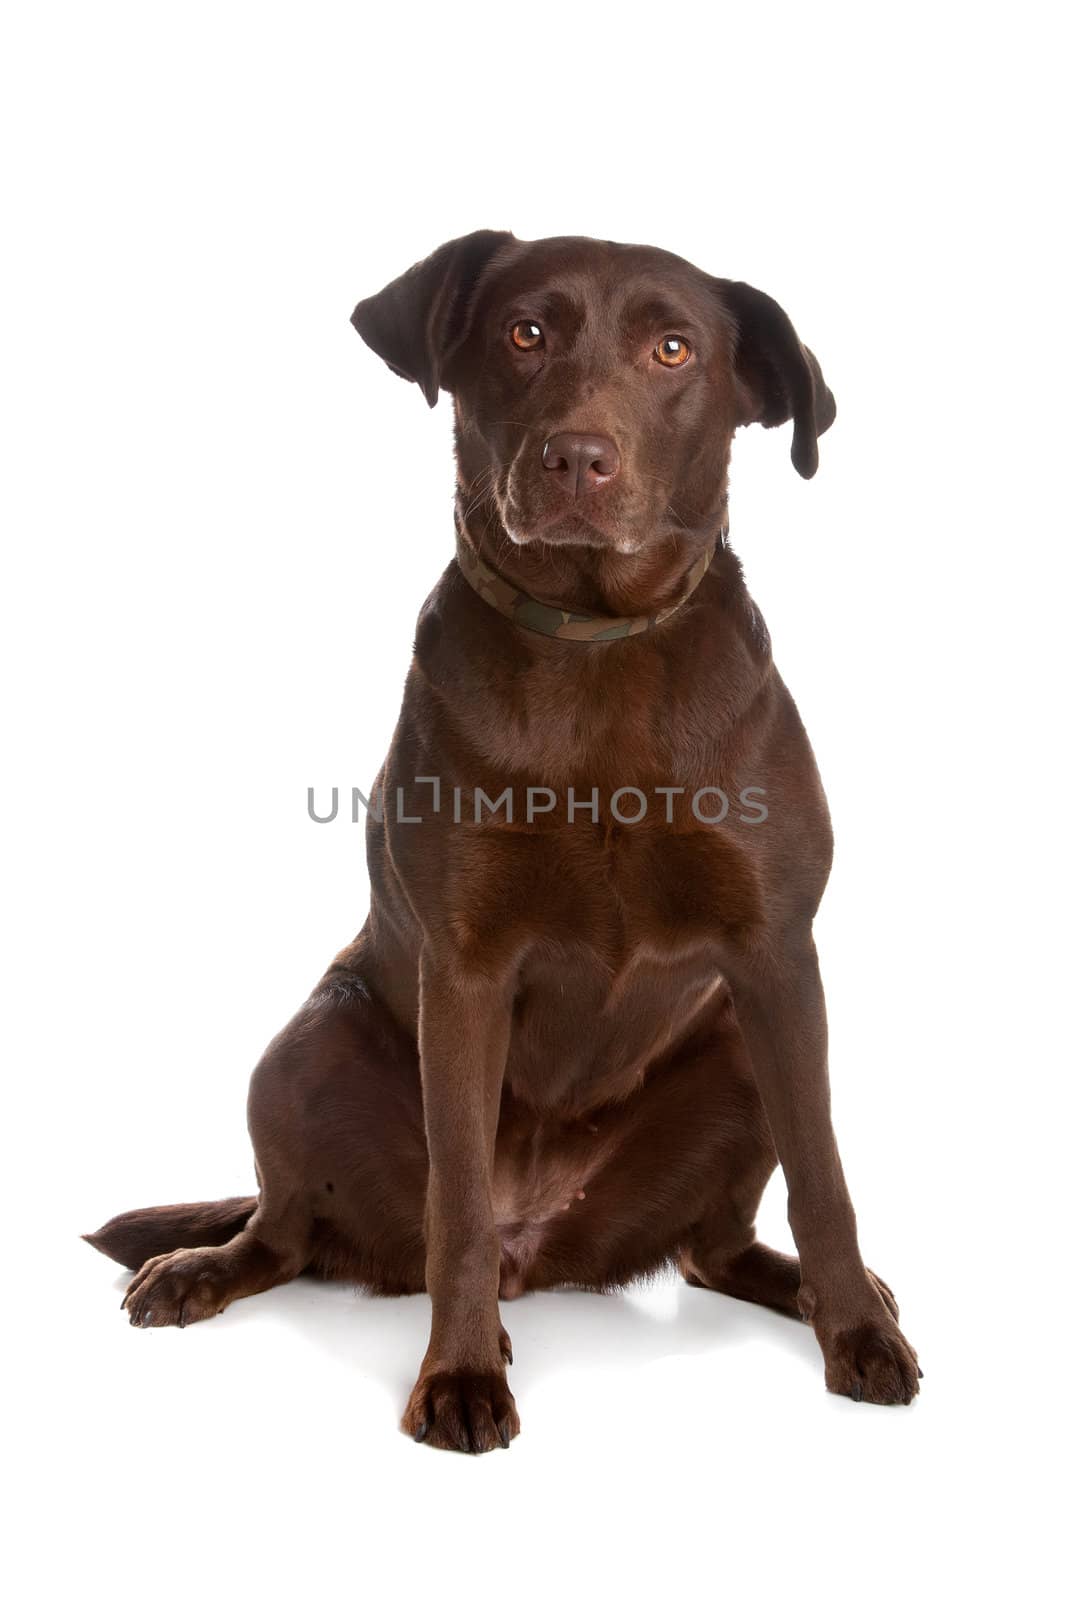 Chocolate labrador retriever dog sitting and looking at camera, isolated on a white background.